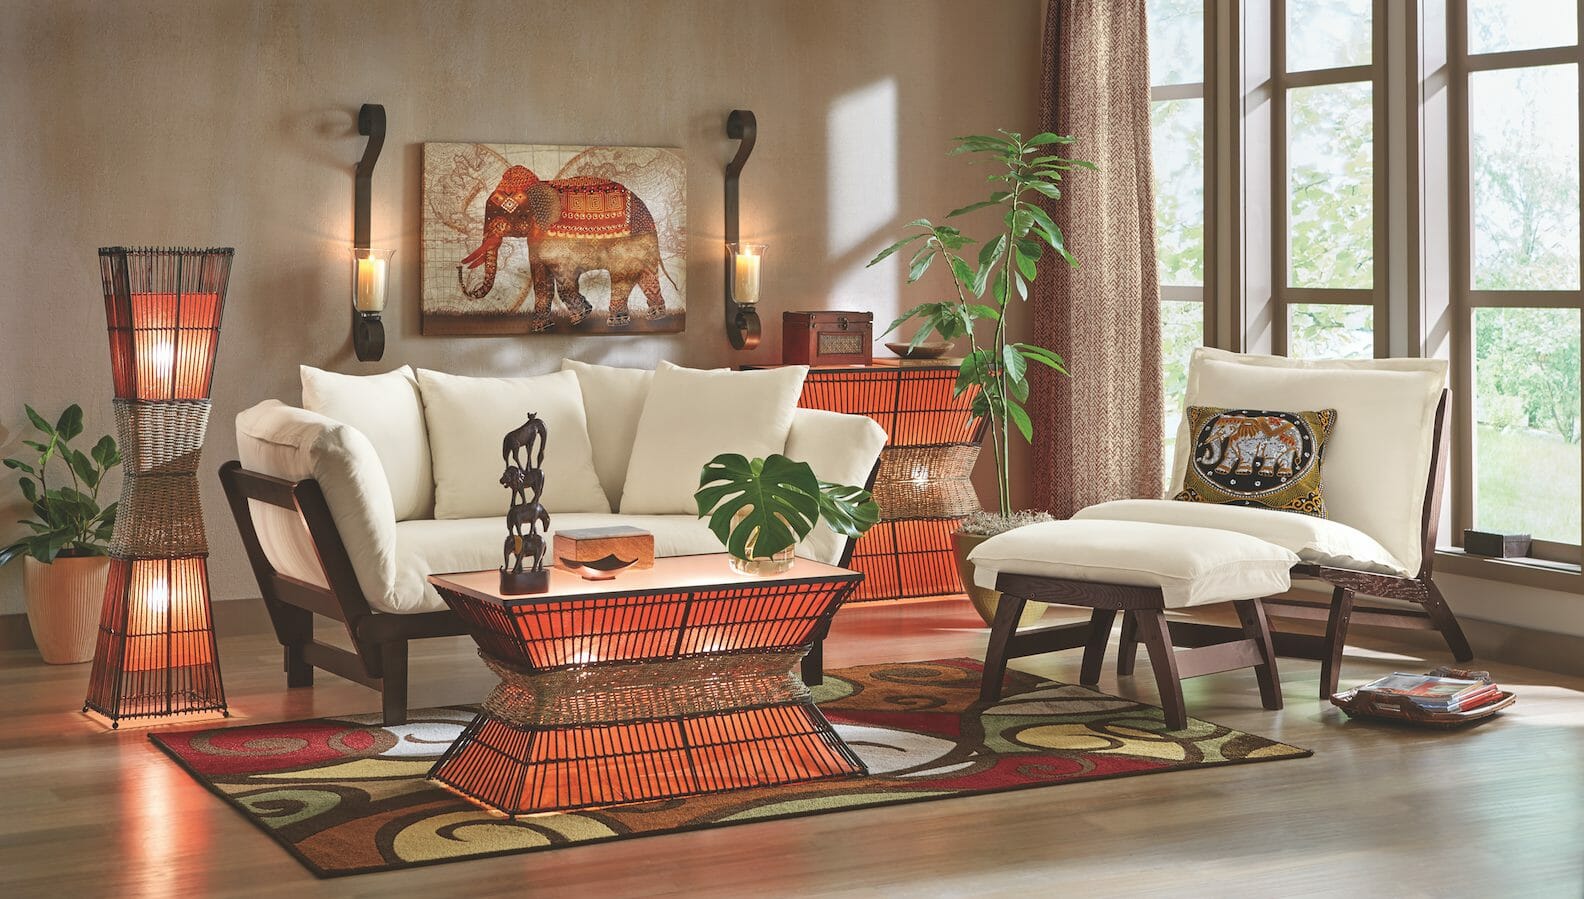 An Afrocentric living room with an ivory futon and chair, lit orange and wicker tables, an elephant wall canvas and figurines.